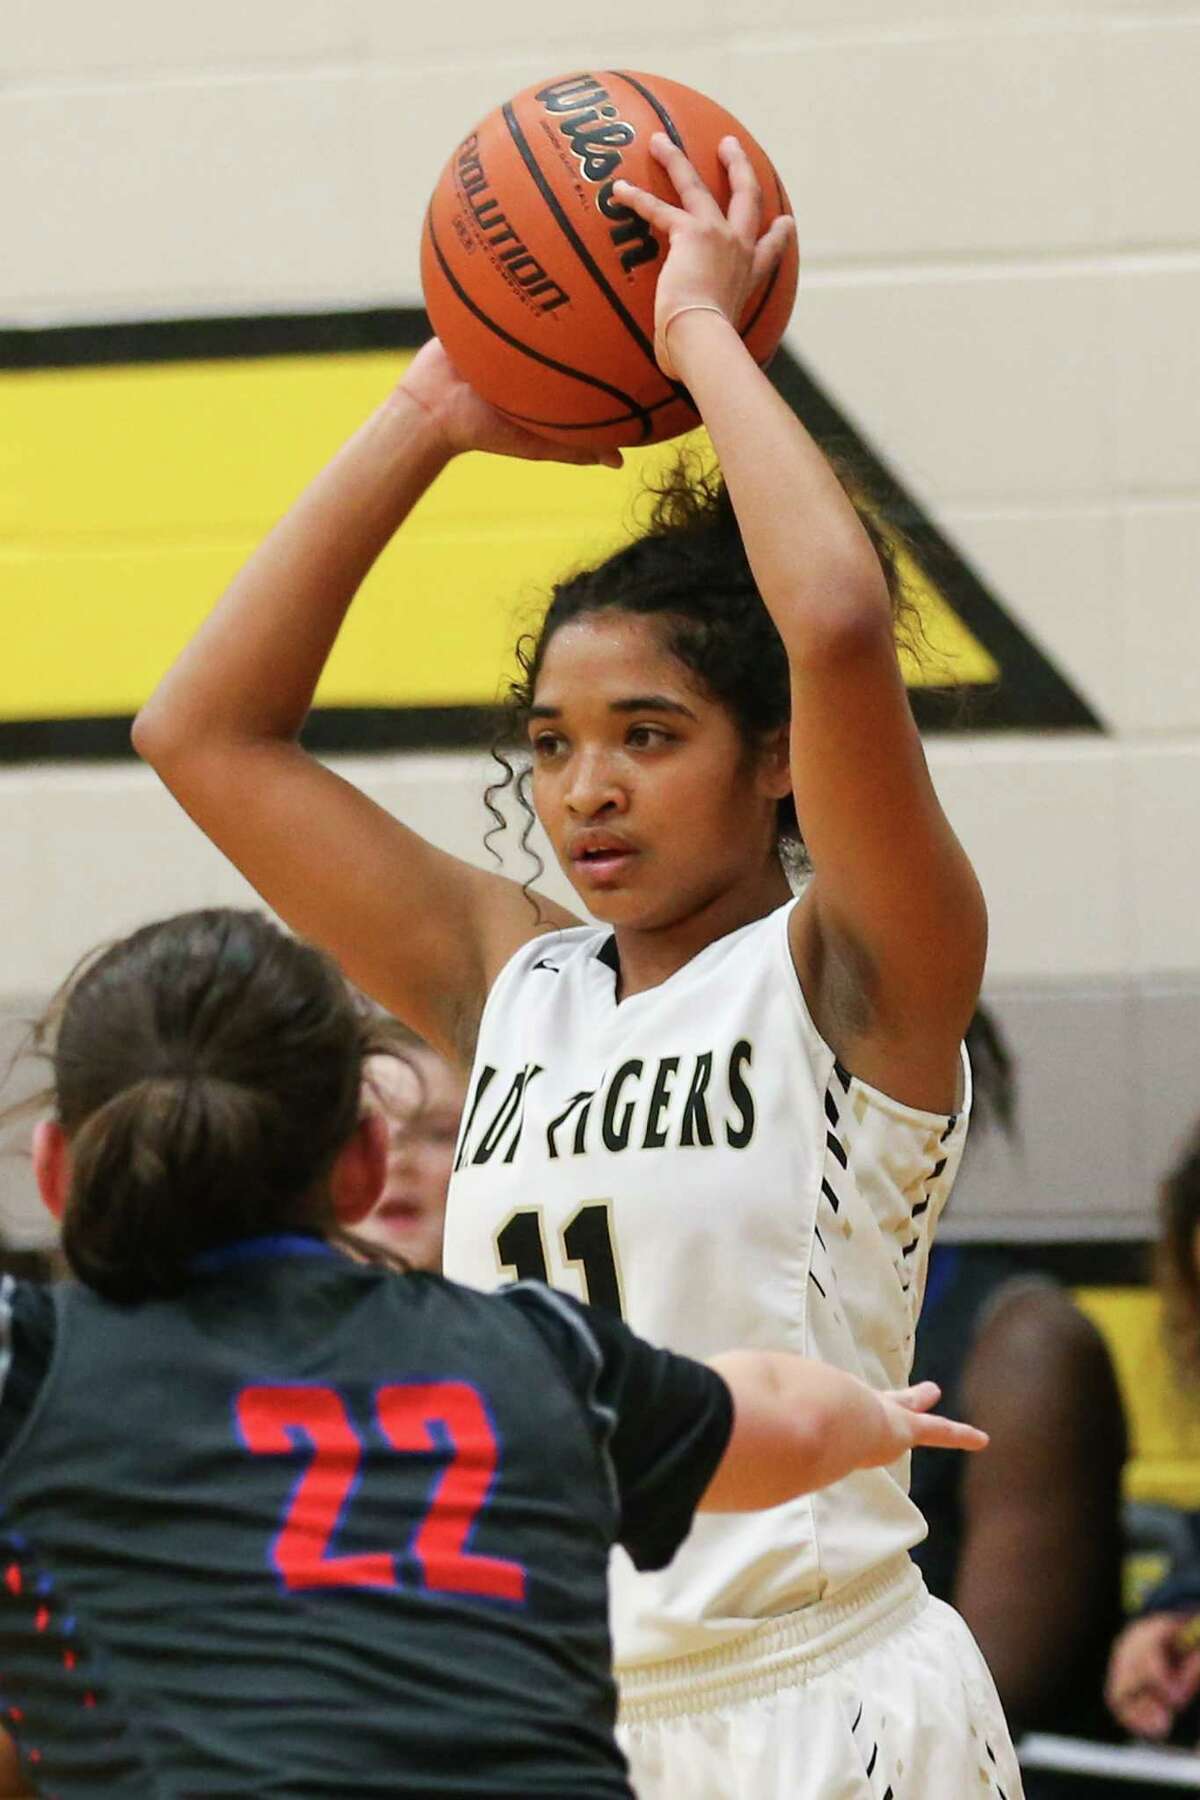 Conroe's Jznae Kim (11) looks to pass the ball during the girls basketball game against Oak Ridge on Friday, Jan. 12, 2018, at Conroe High School. (Michael Minasi / Houston Chronicle)